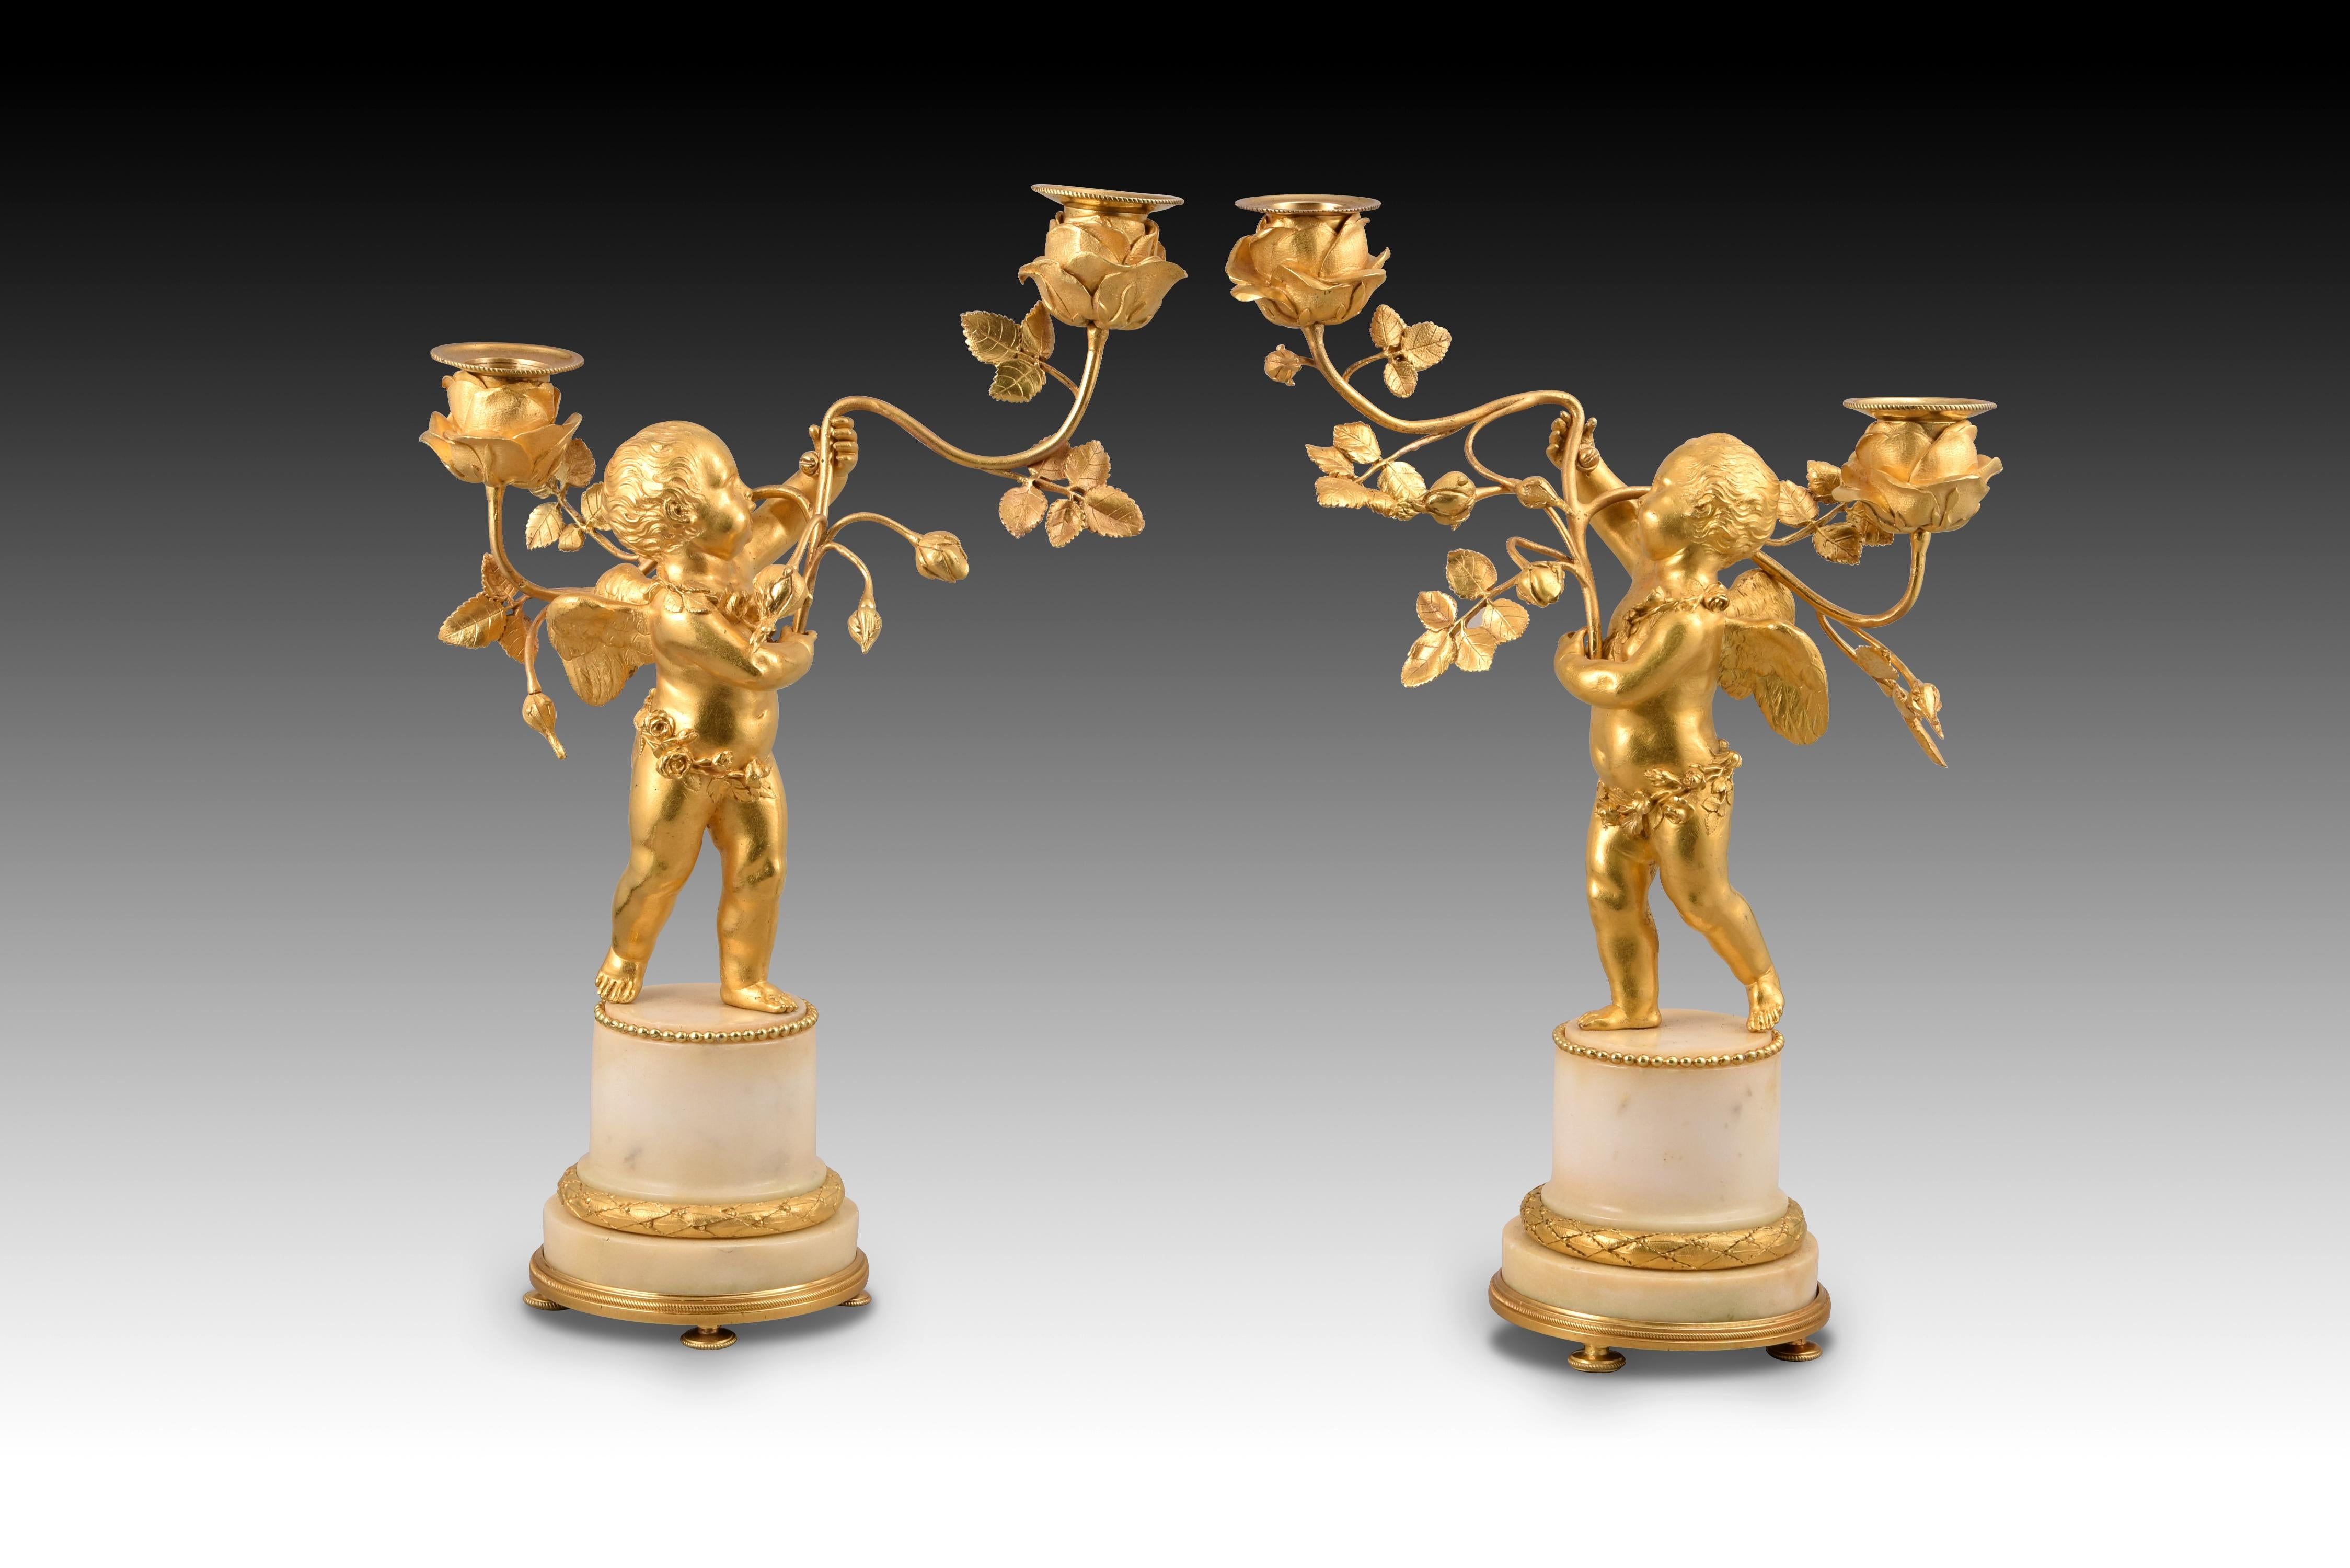 Pair of candlesticks. Gilt bronze, white marble. Around Napoleon III period, France. 
Pair of two-light chandeliers with a white marble base and gilt-bronze details made in gilt-bronze that each show a halfnaked Cupid or little angel with its body